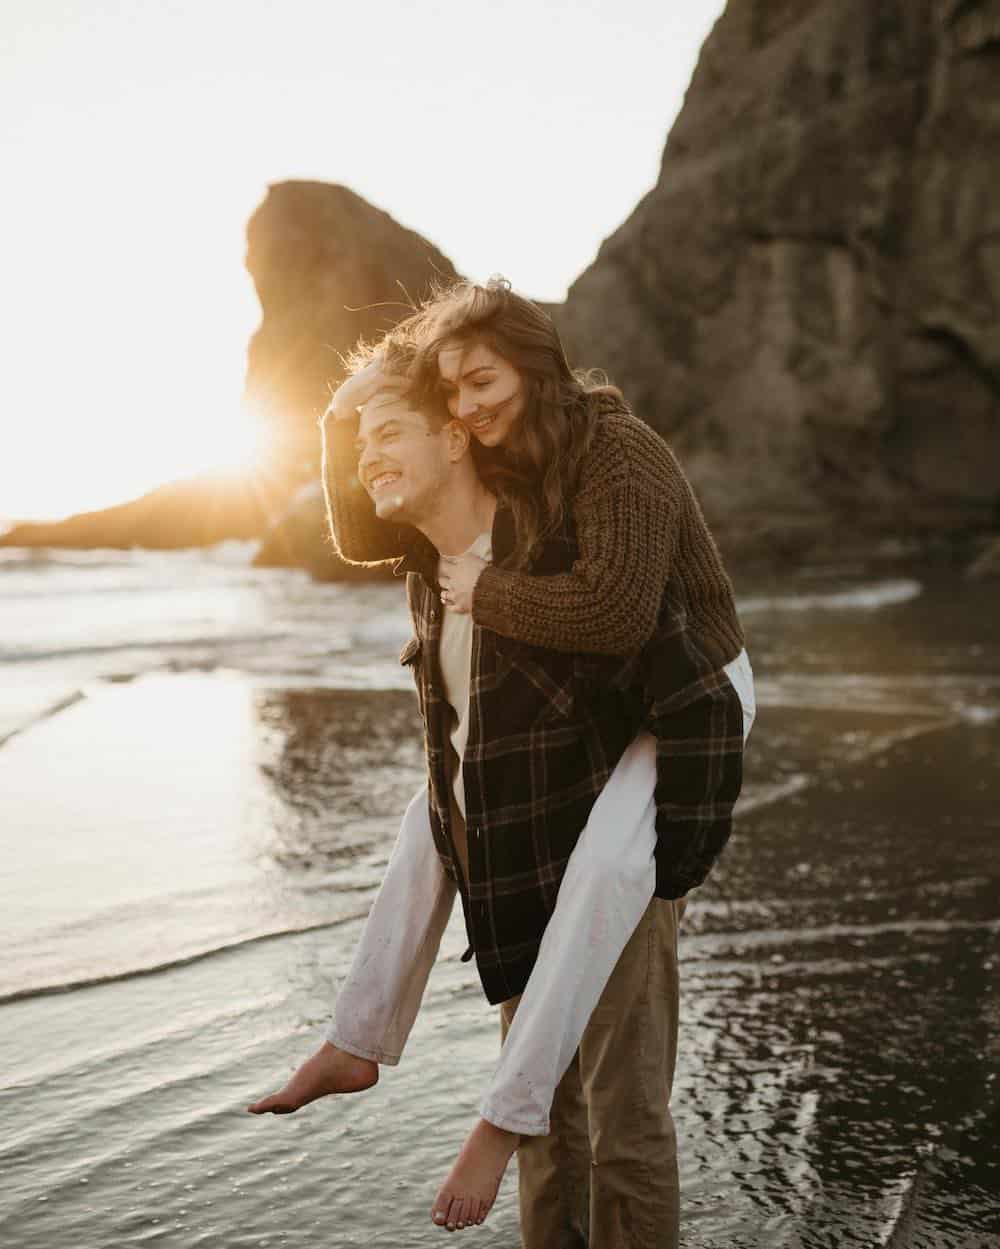 A couple during their engagement photos, the woman is wearing white pants and a brown knit sweater while the man swears tan khakis and a plaid shirt